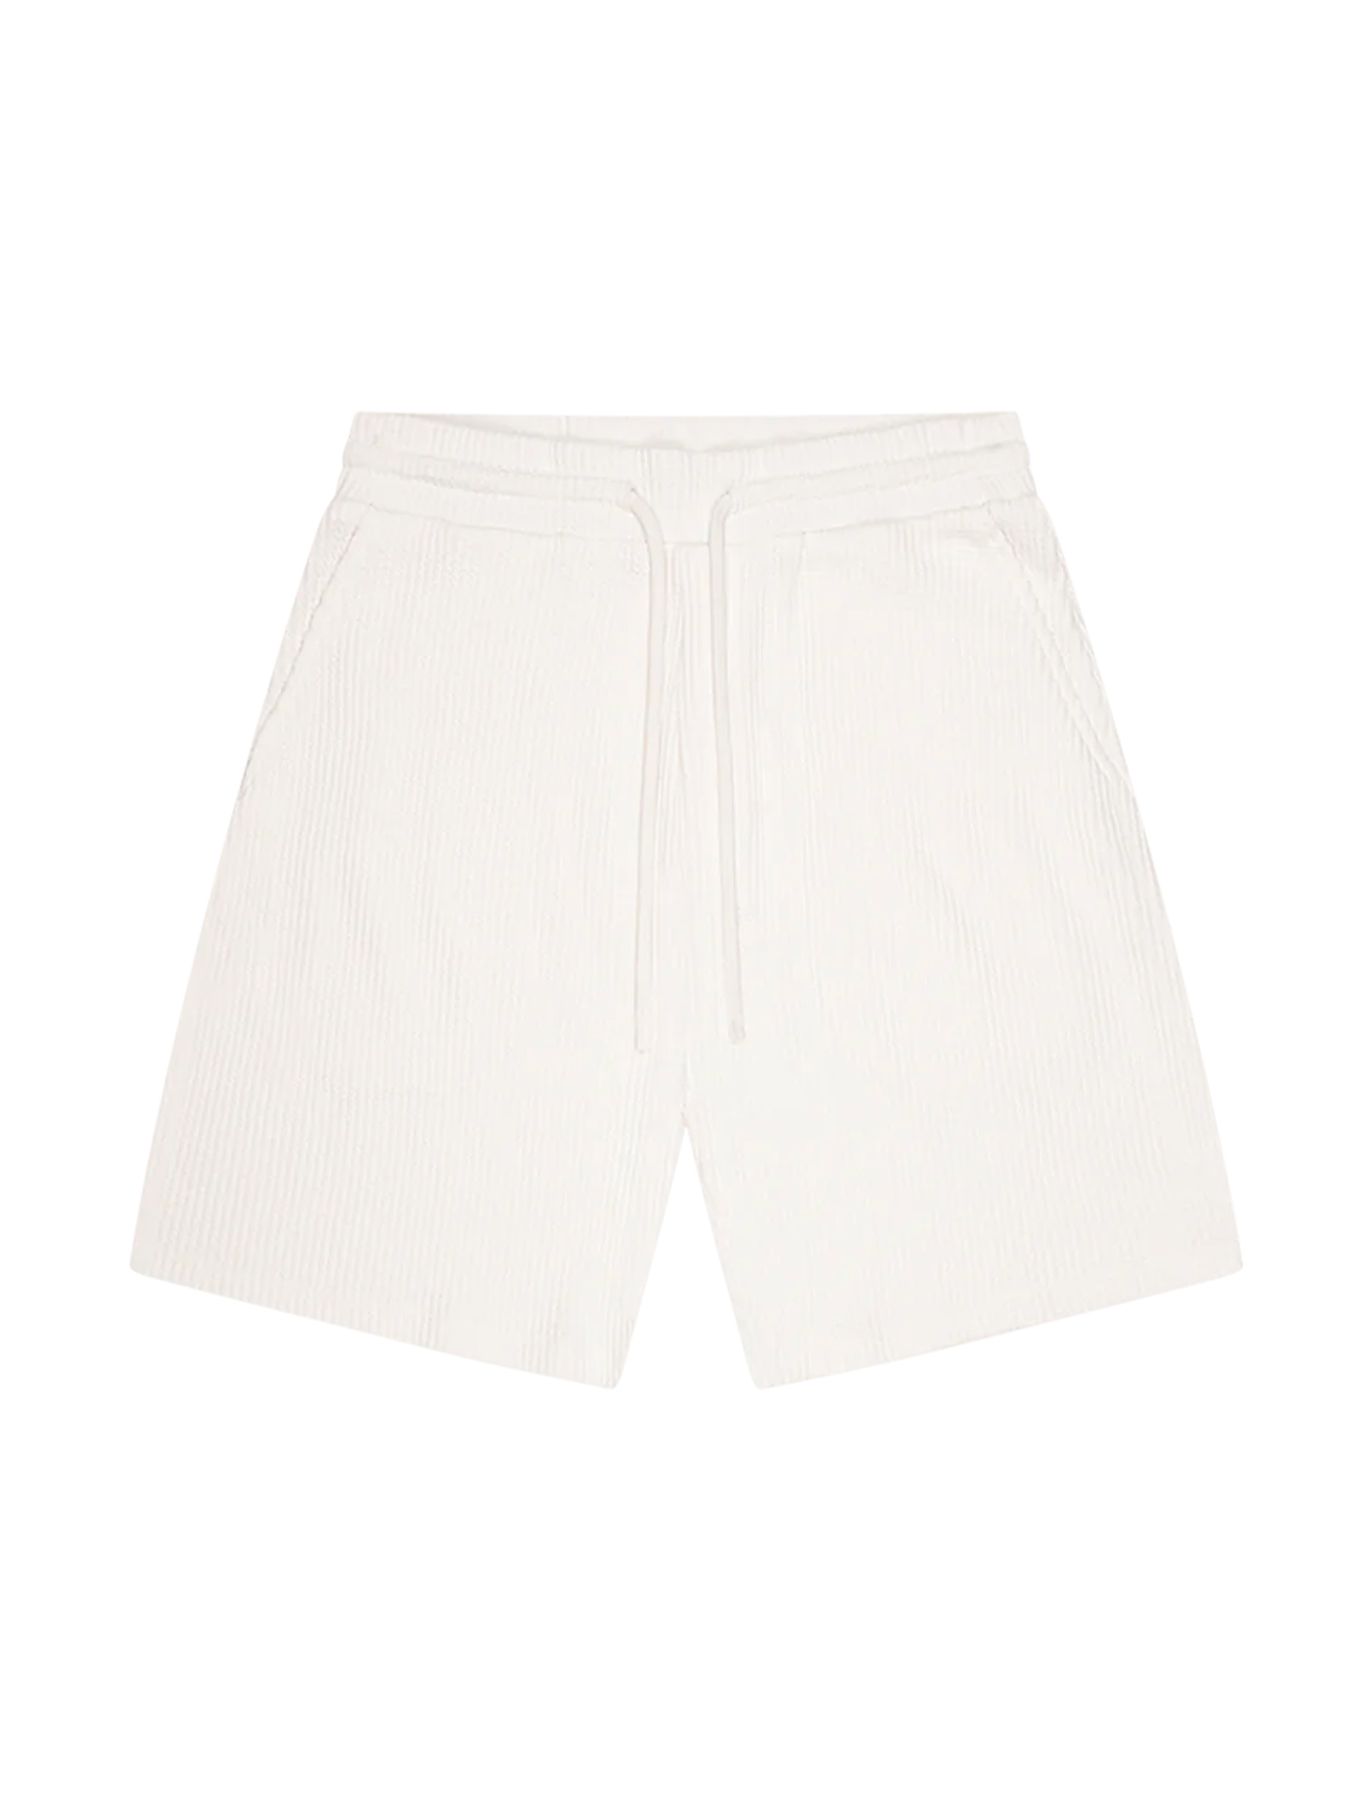 Quotrell Playa shorts Off White 00108206-OFFWHITE